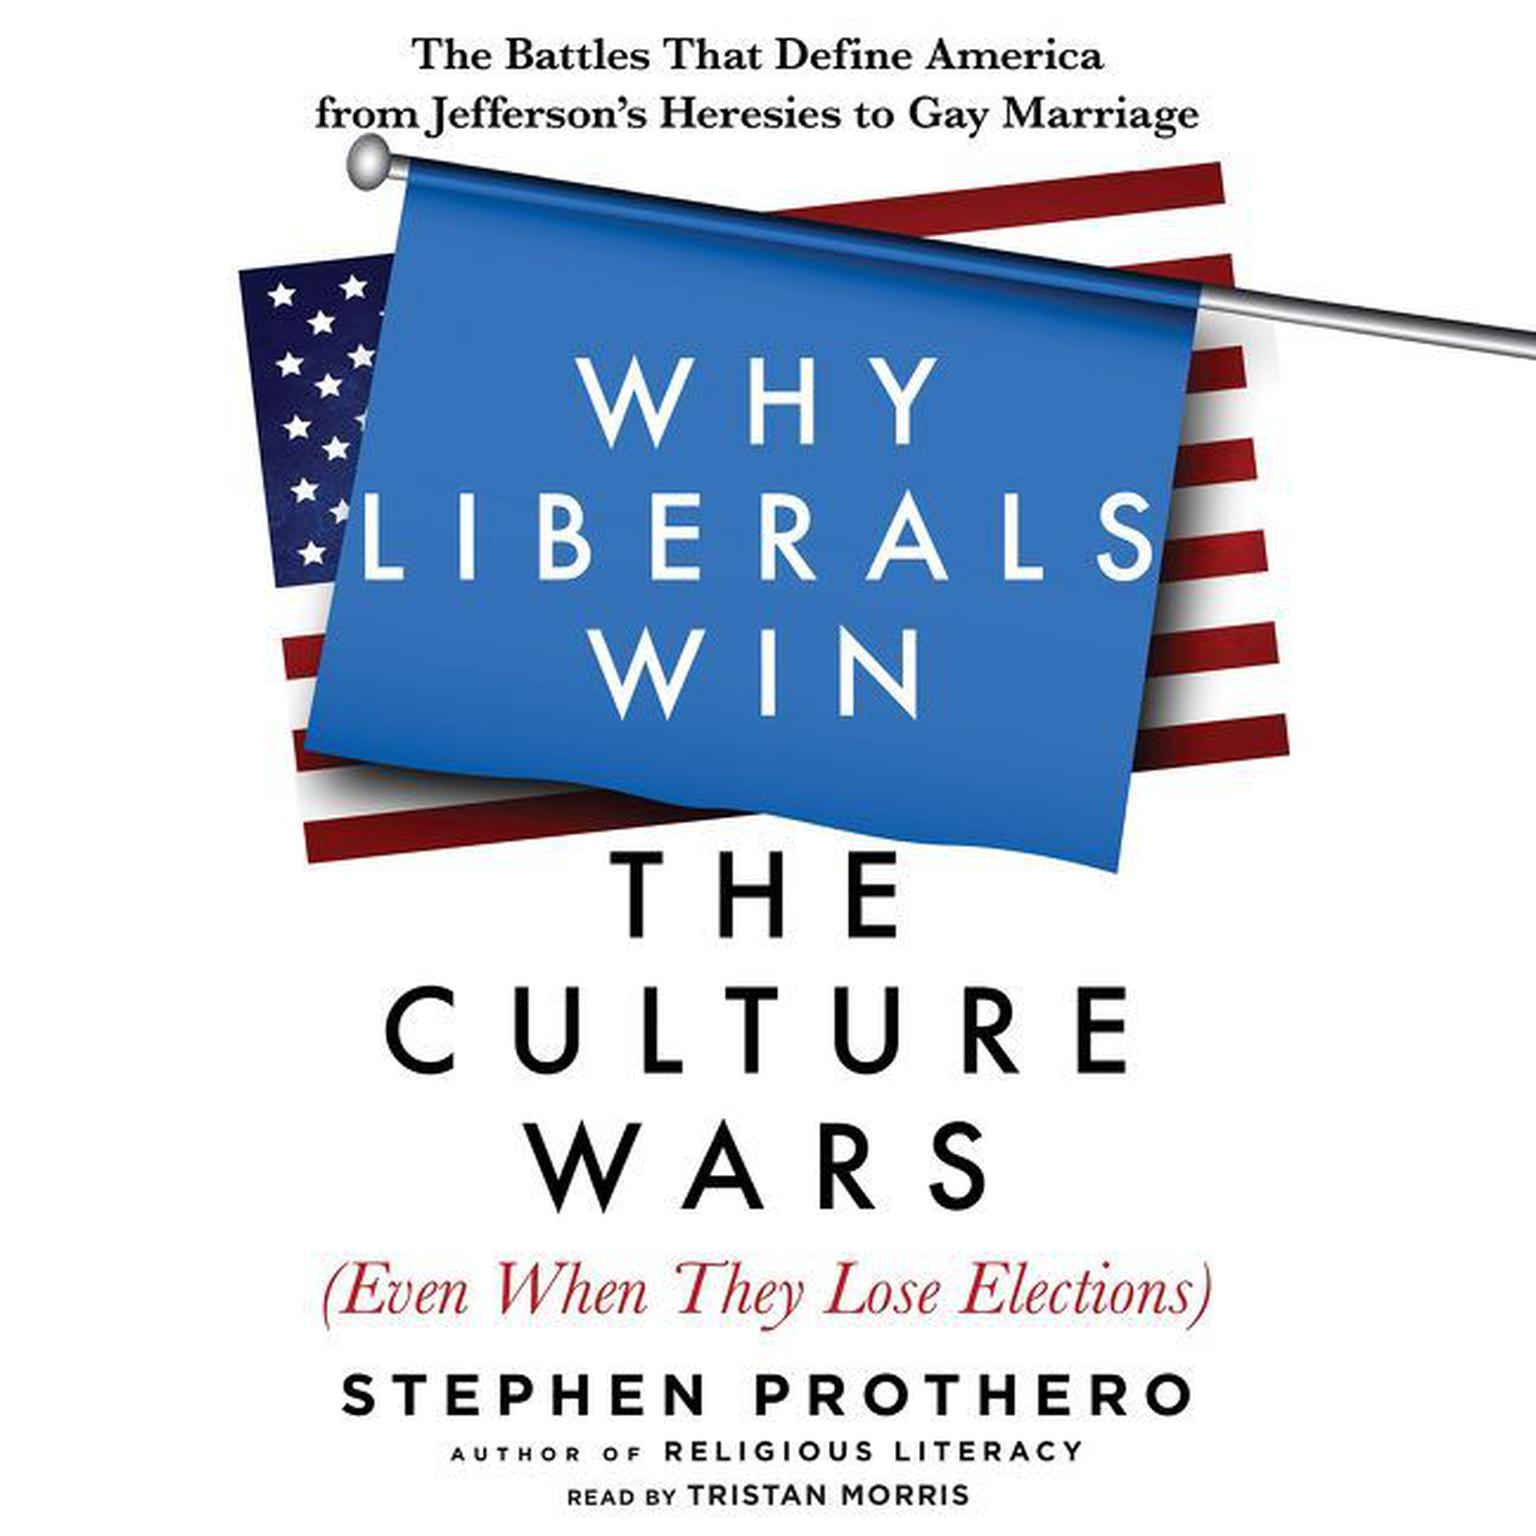 Why Liberals Win the Culture Wars (Even When They Lose Elections): The Battles That Define America from Jeffersons Heresies to Gay Marriage Audiobook, by Stephen Prothero